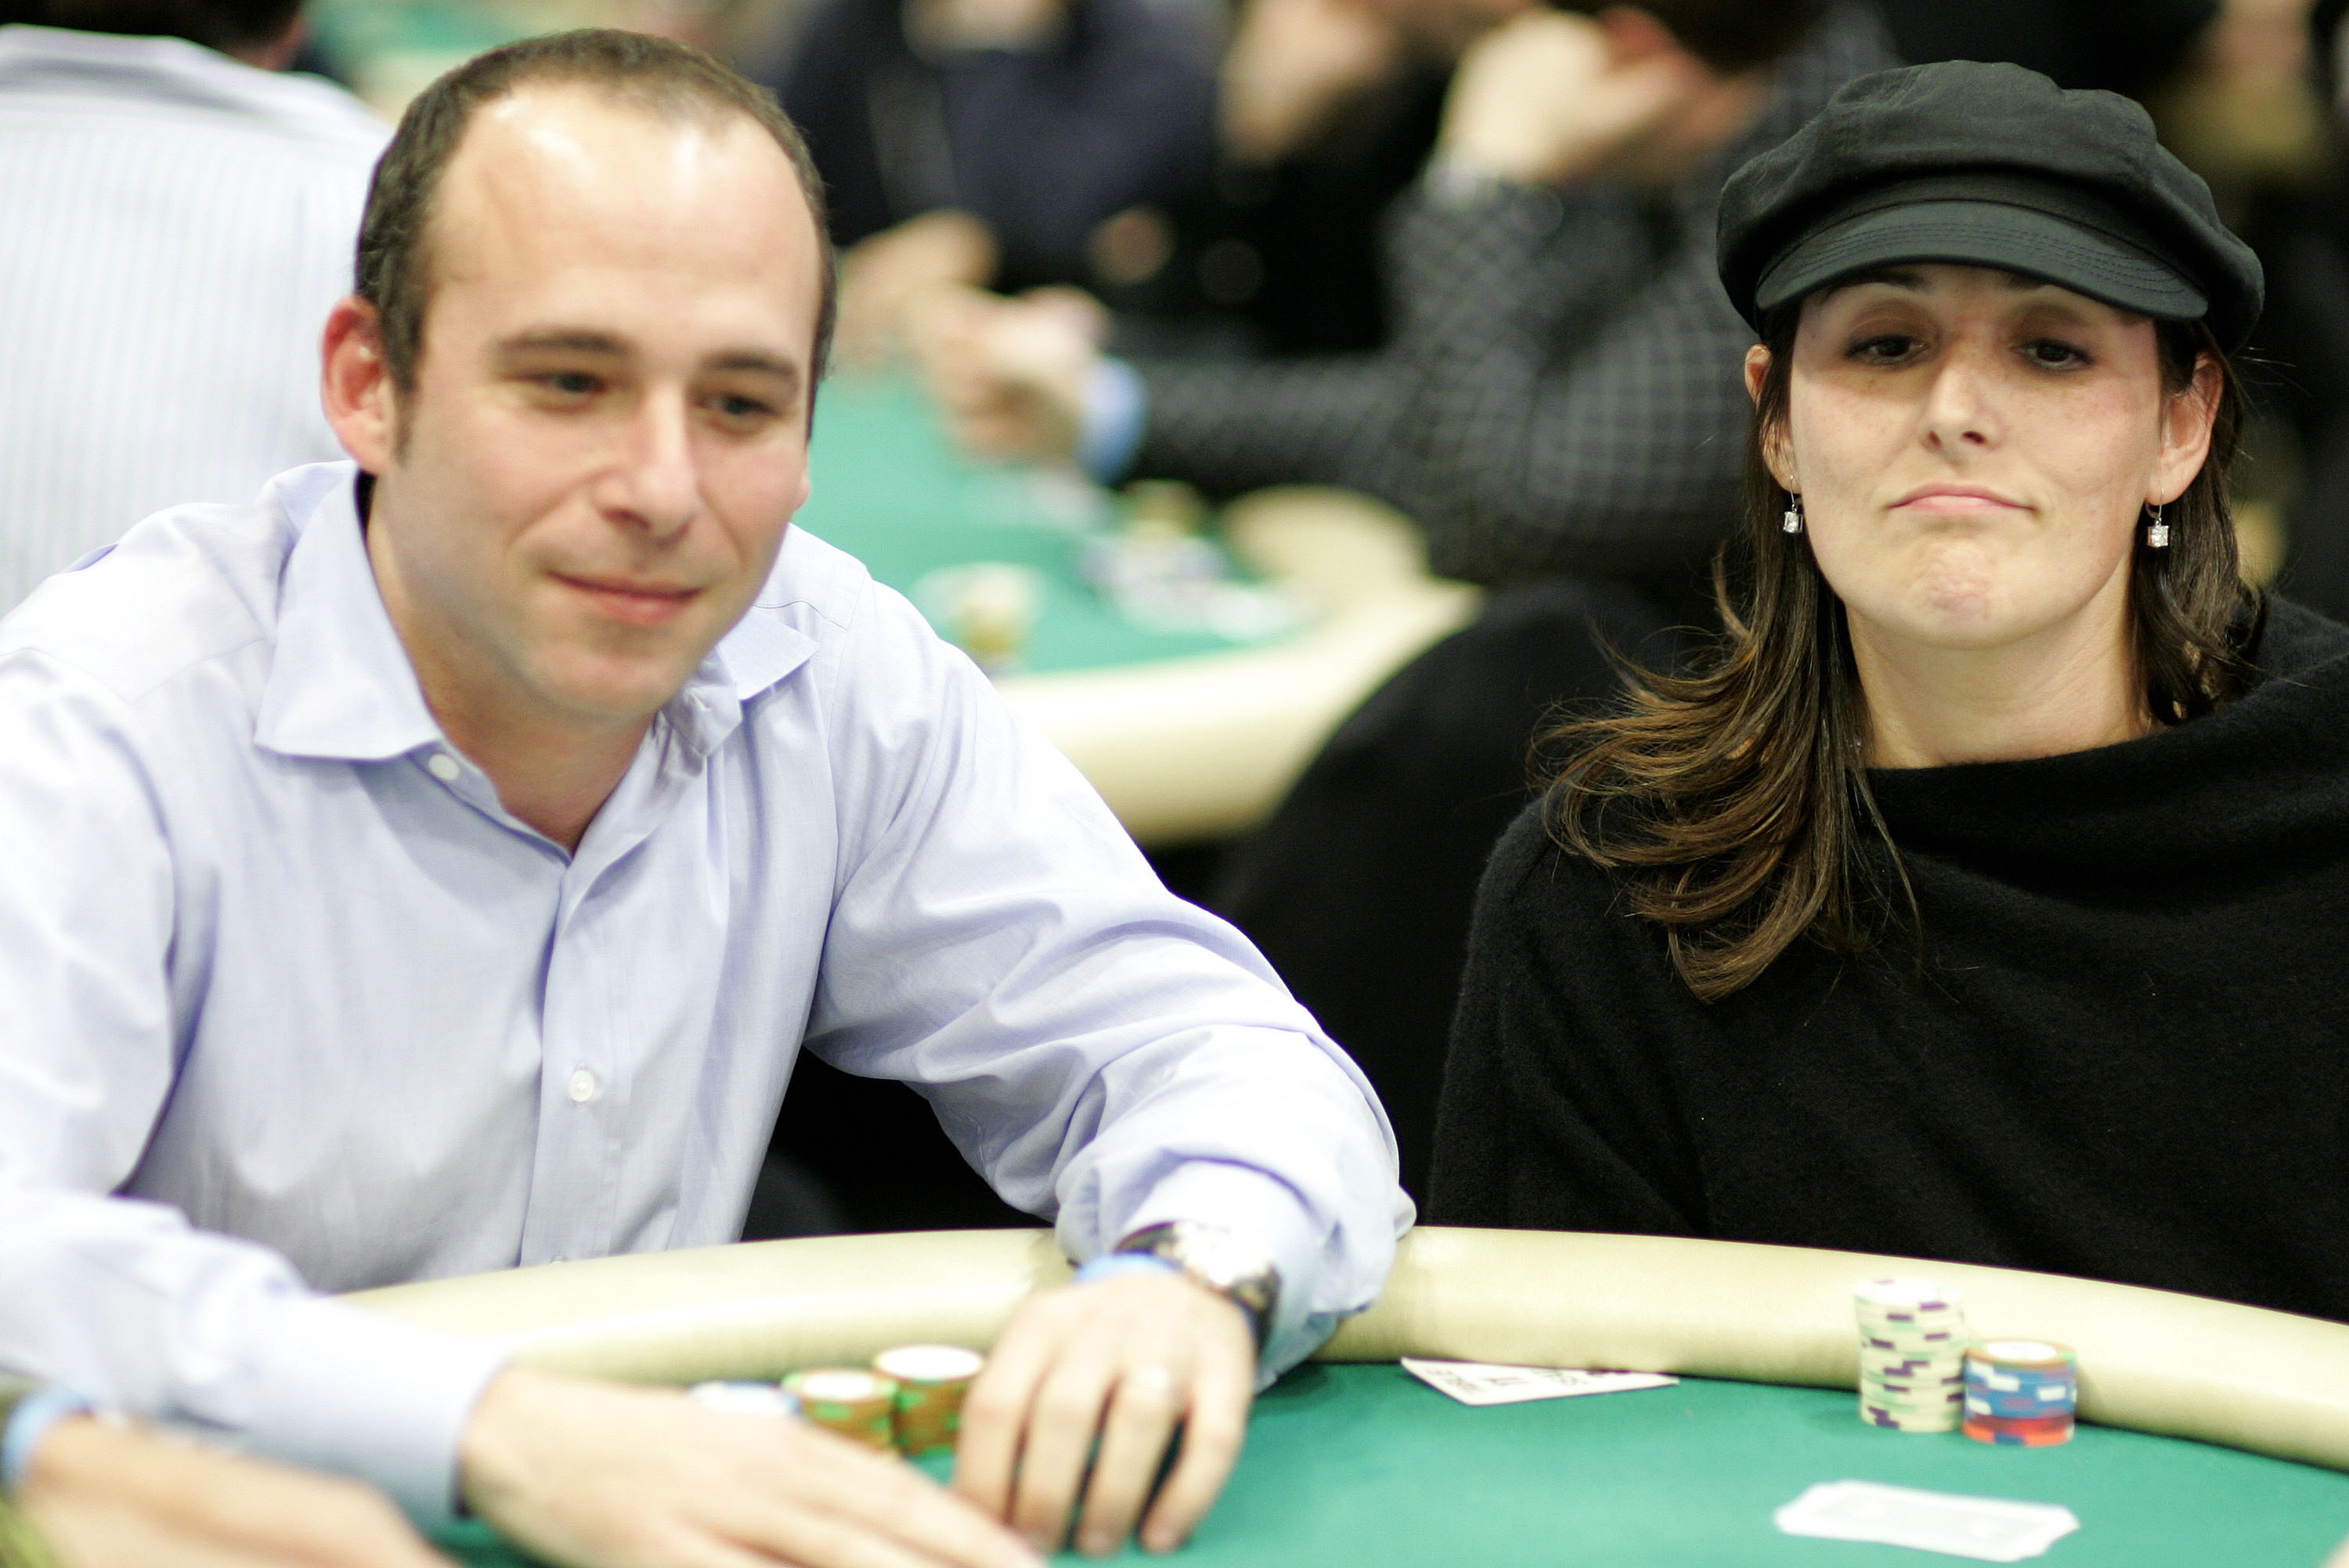 Ricki Lake during World Poker Tour Invitational in Commerce, California, on February 22, 2006. | Source: Getty Images